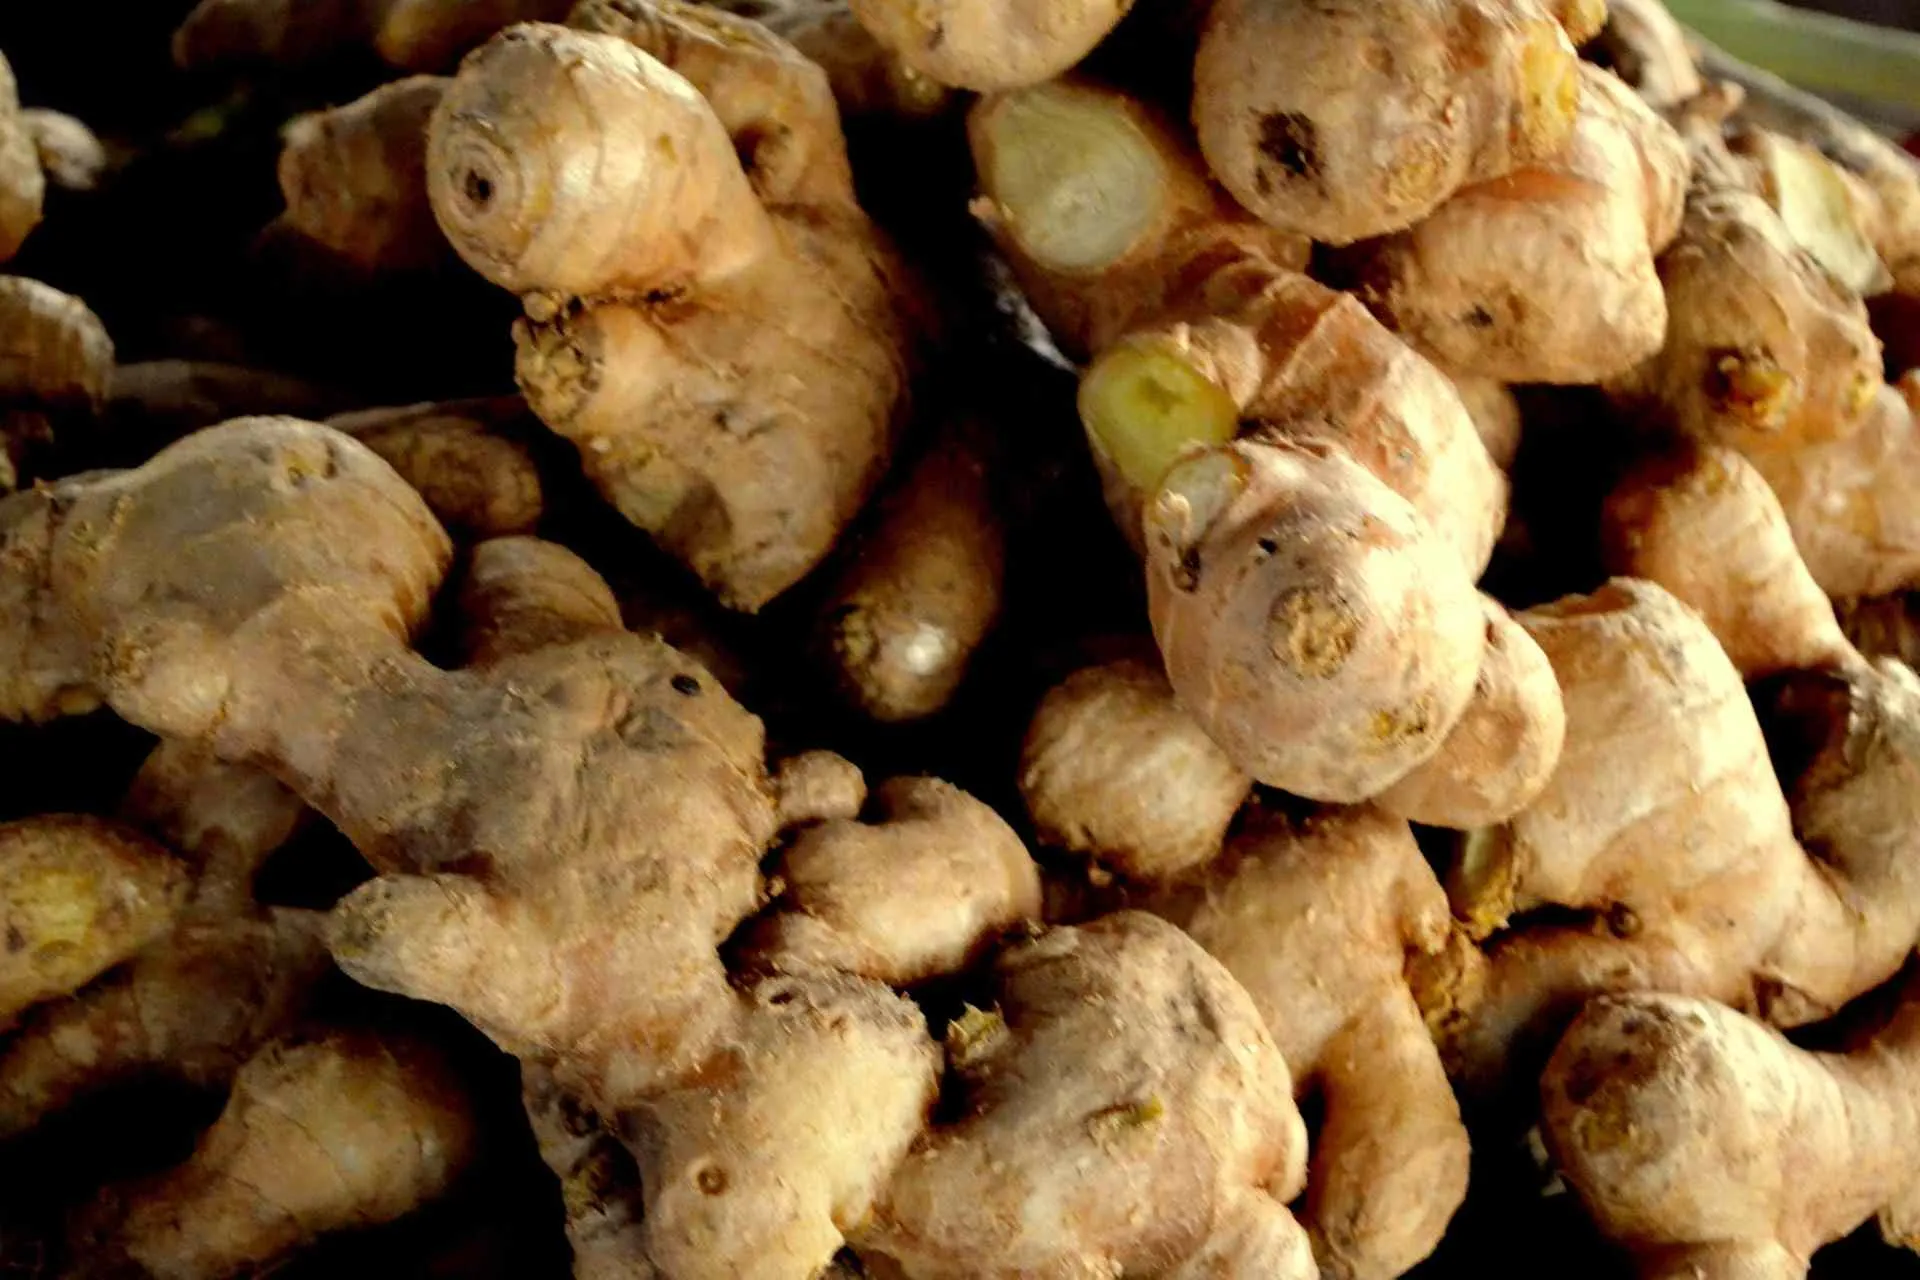 Ginger root has been shown to reduce inflammation.